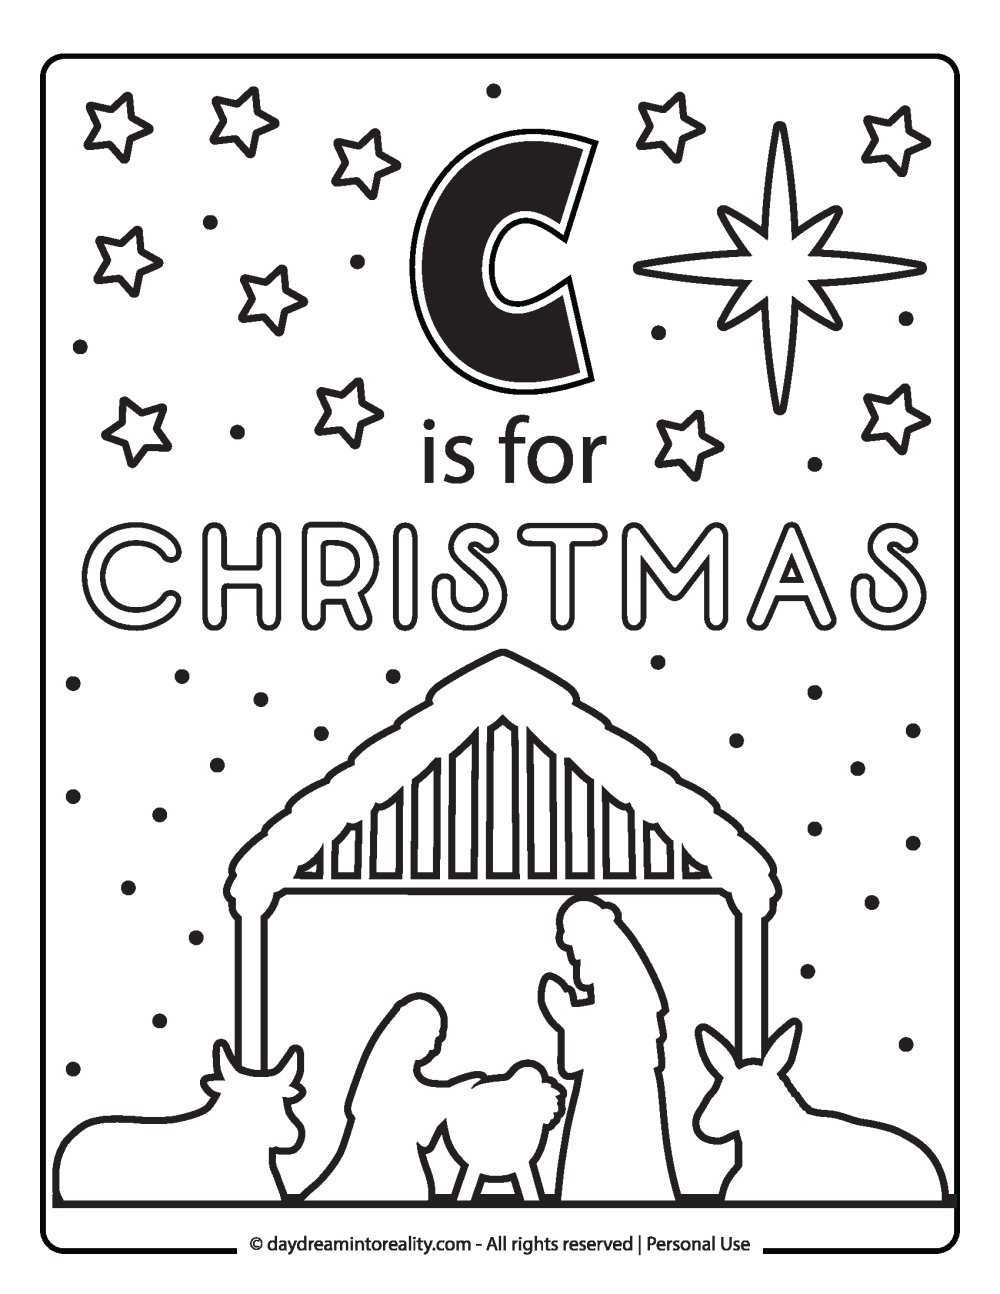 Letter C coloring page free printable - c is for Christmas